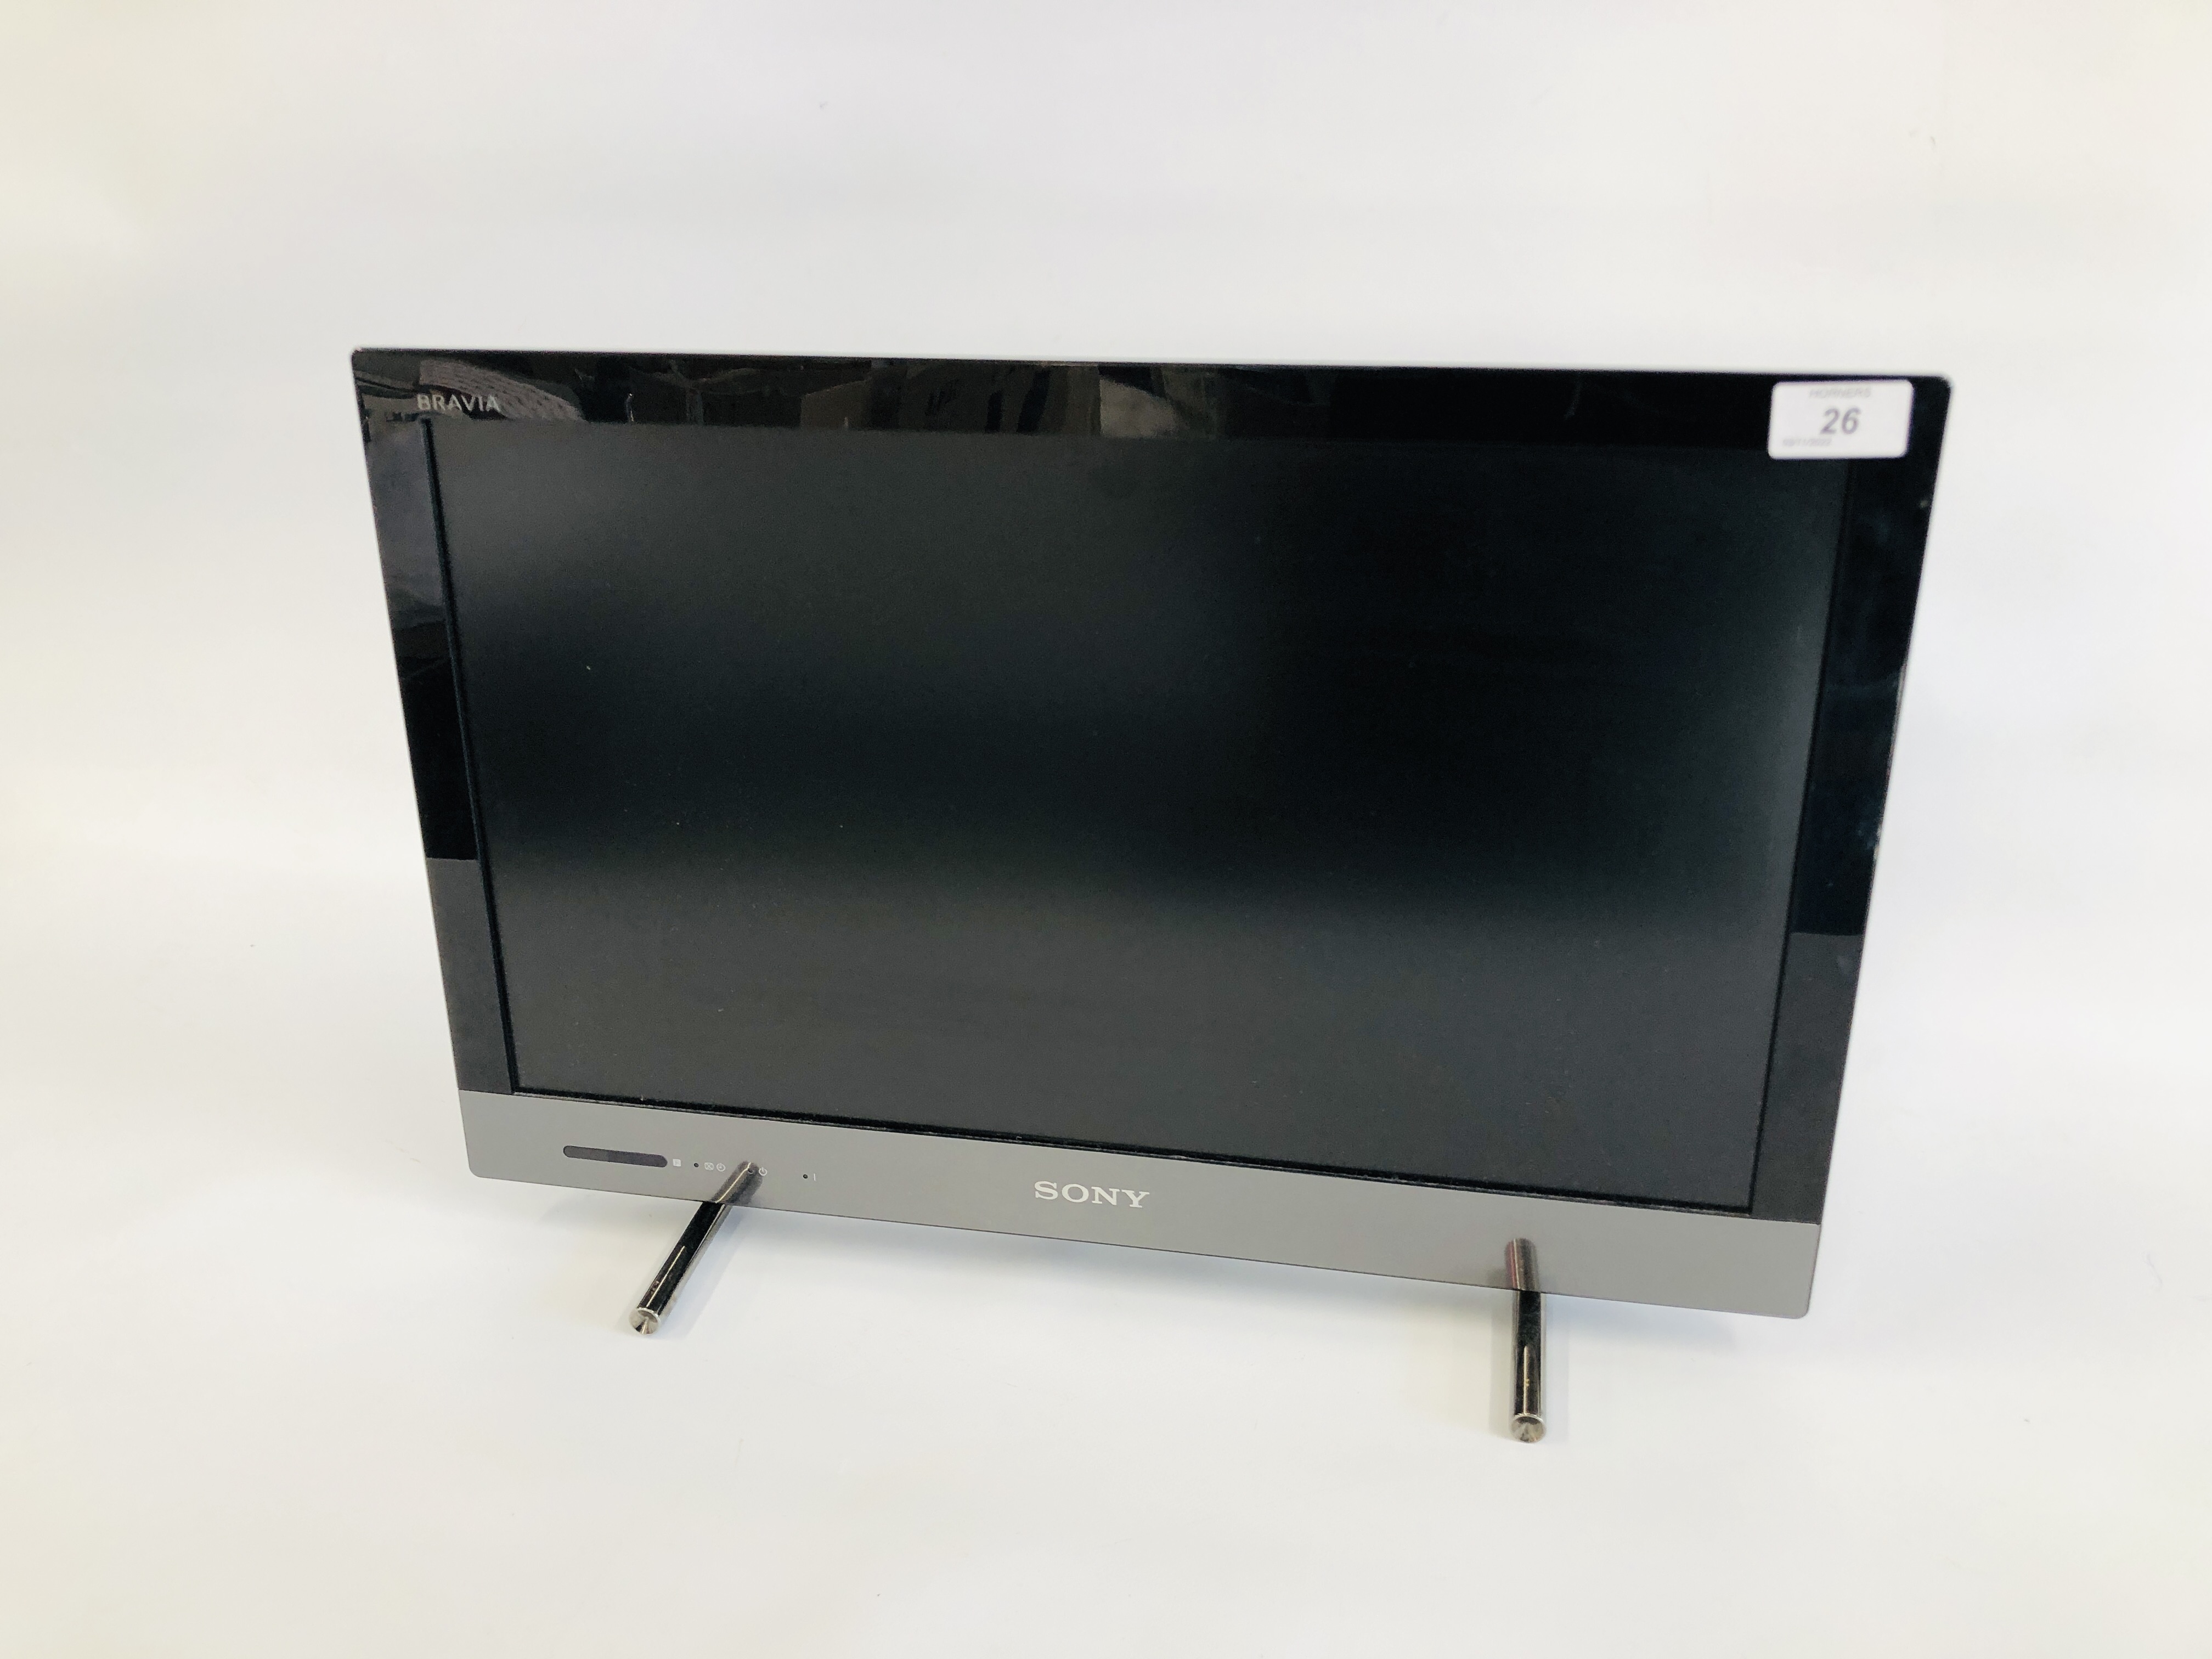 SONY BRAVIA 22" FLAT SCREEN TELEVISION - SOLD AS SEEN